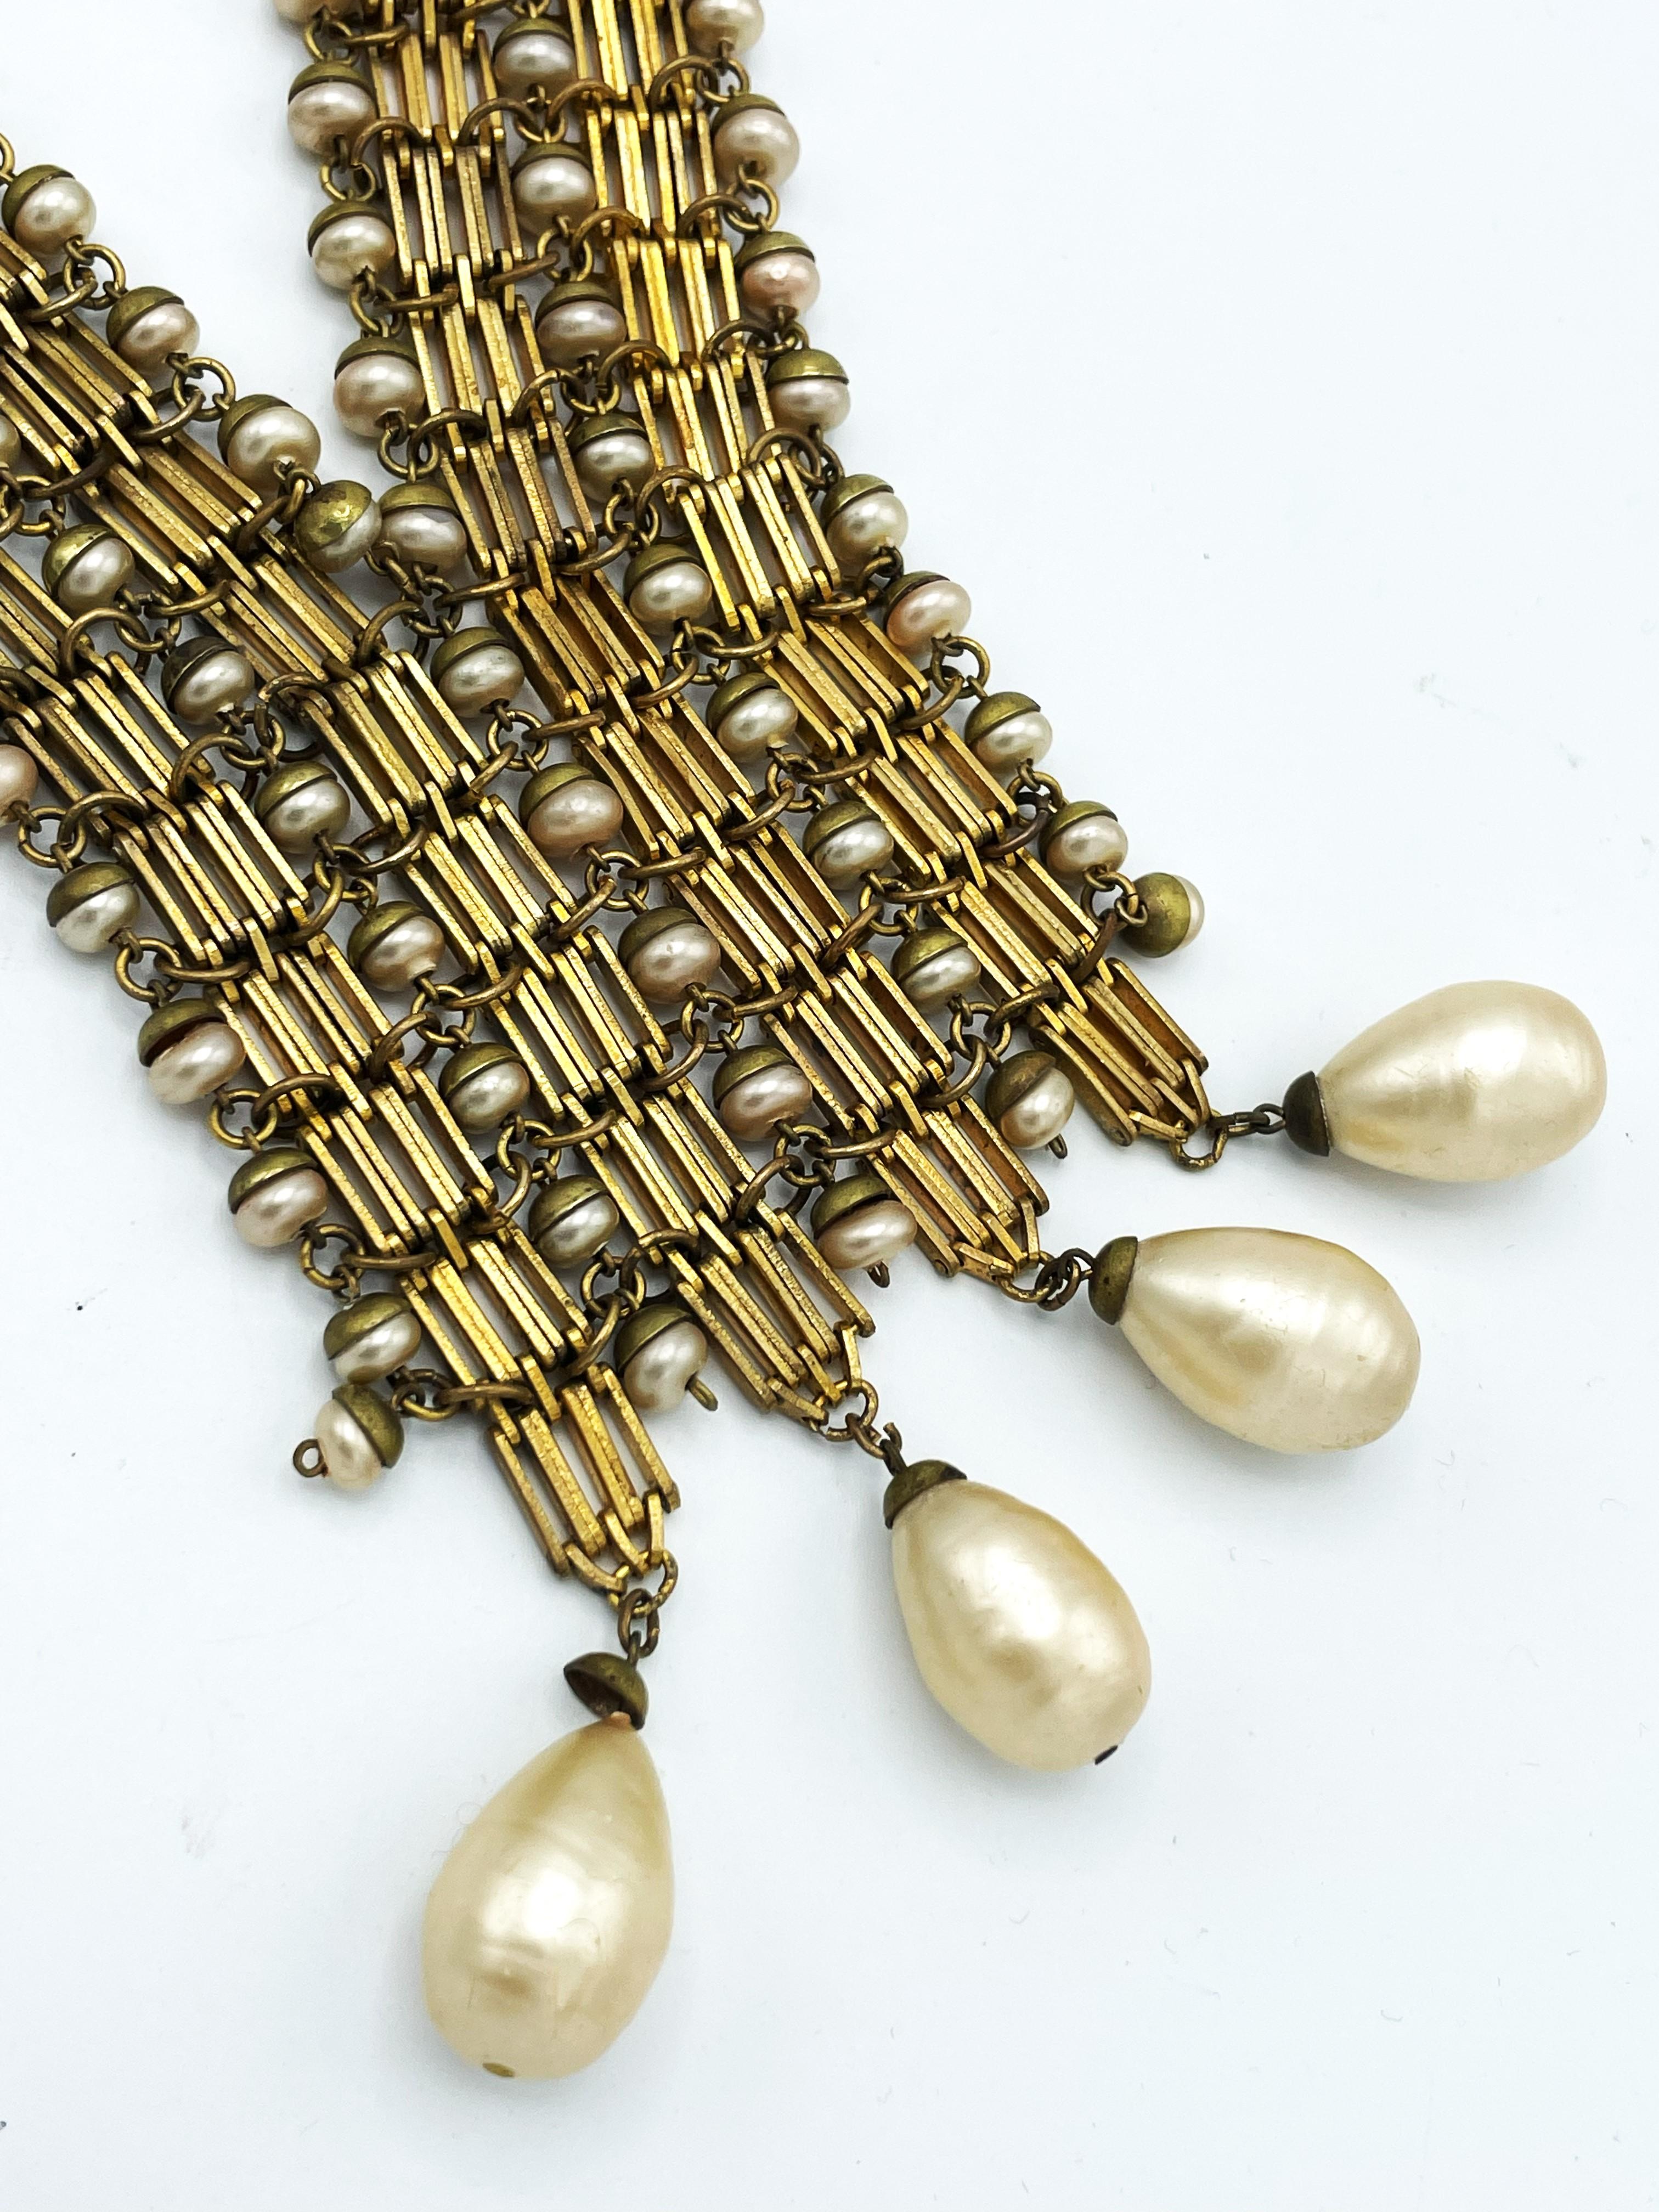 V-SHAPED necklace, Made in France early 1940's, gold plated and nice handmade pearls.
2 individual gold-plated strands, each 3.5 cm wide, bordered with small pearls. 
The bottom 6 cm are connected together, resulting in a width of a good 7 cm.